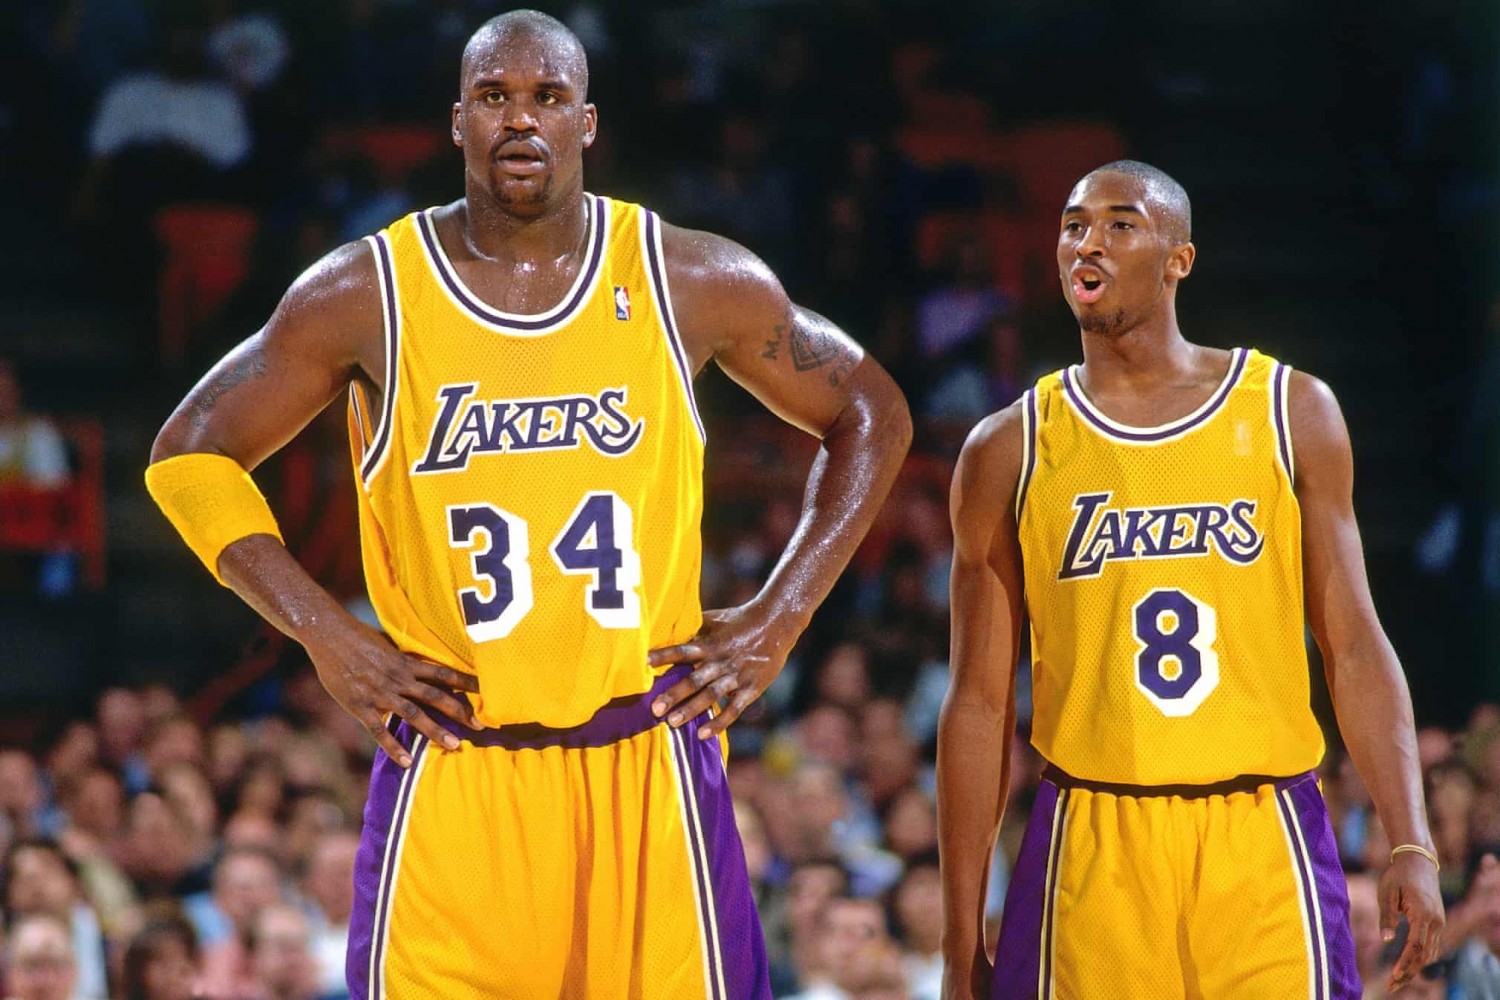 A young Bryant alongside Shaquille O’Neal in November 1996. Photograph: Andrew D Bernstein/NBAE via Getty Images